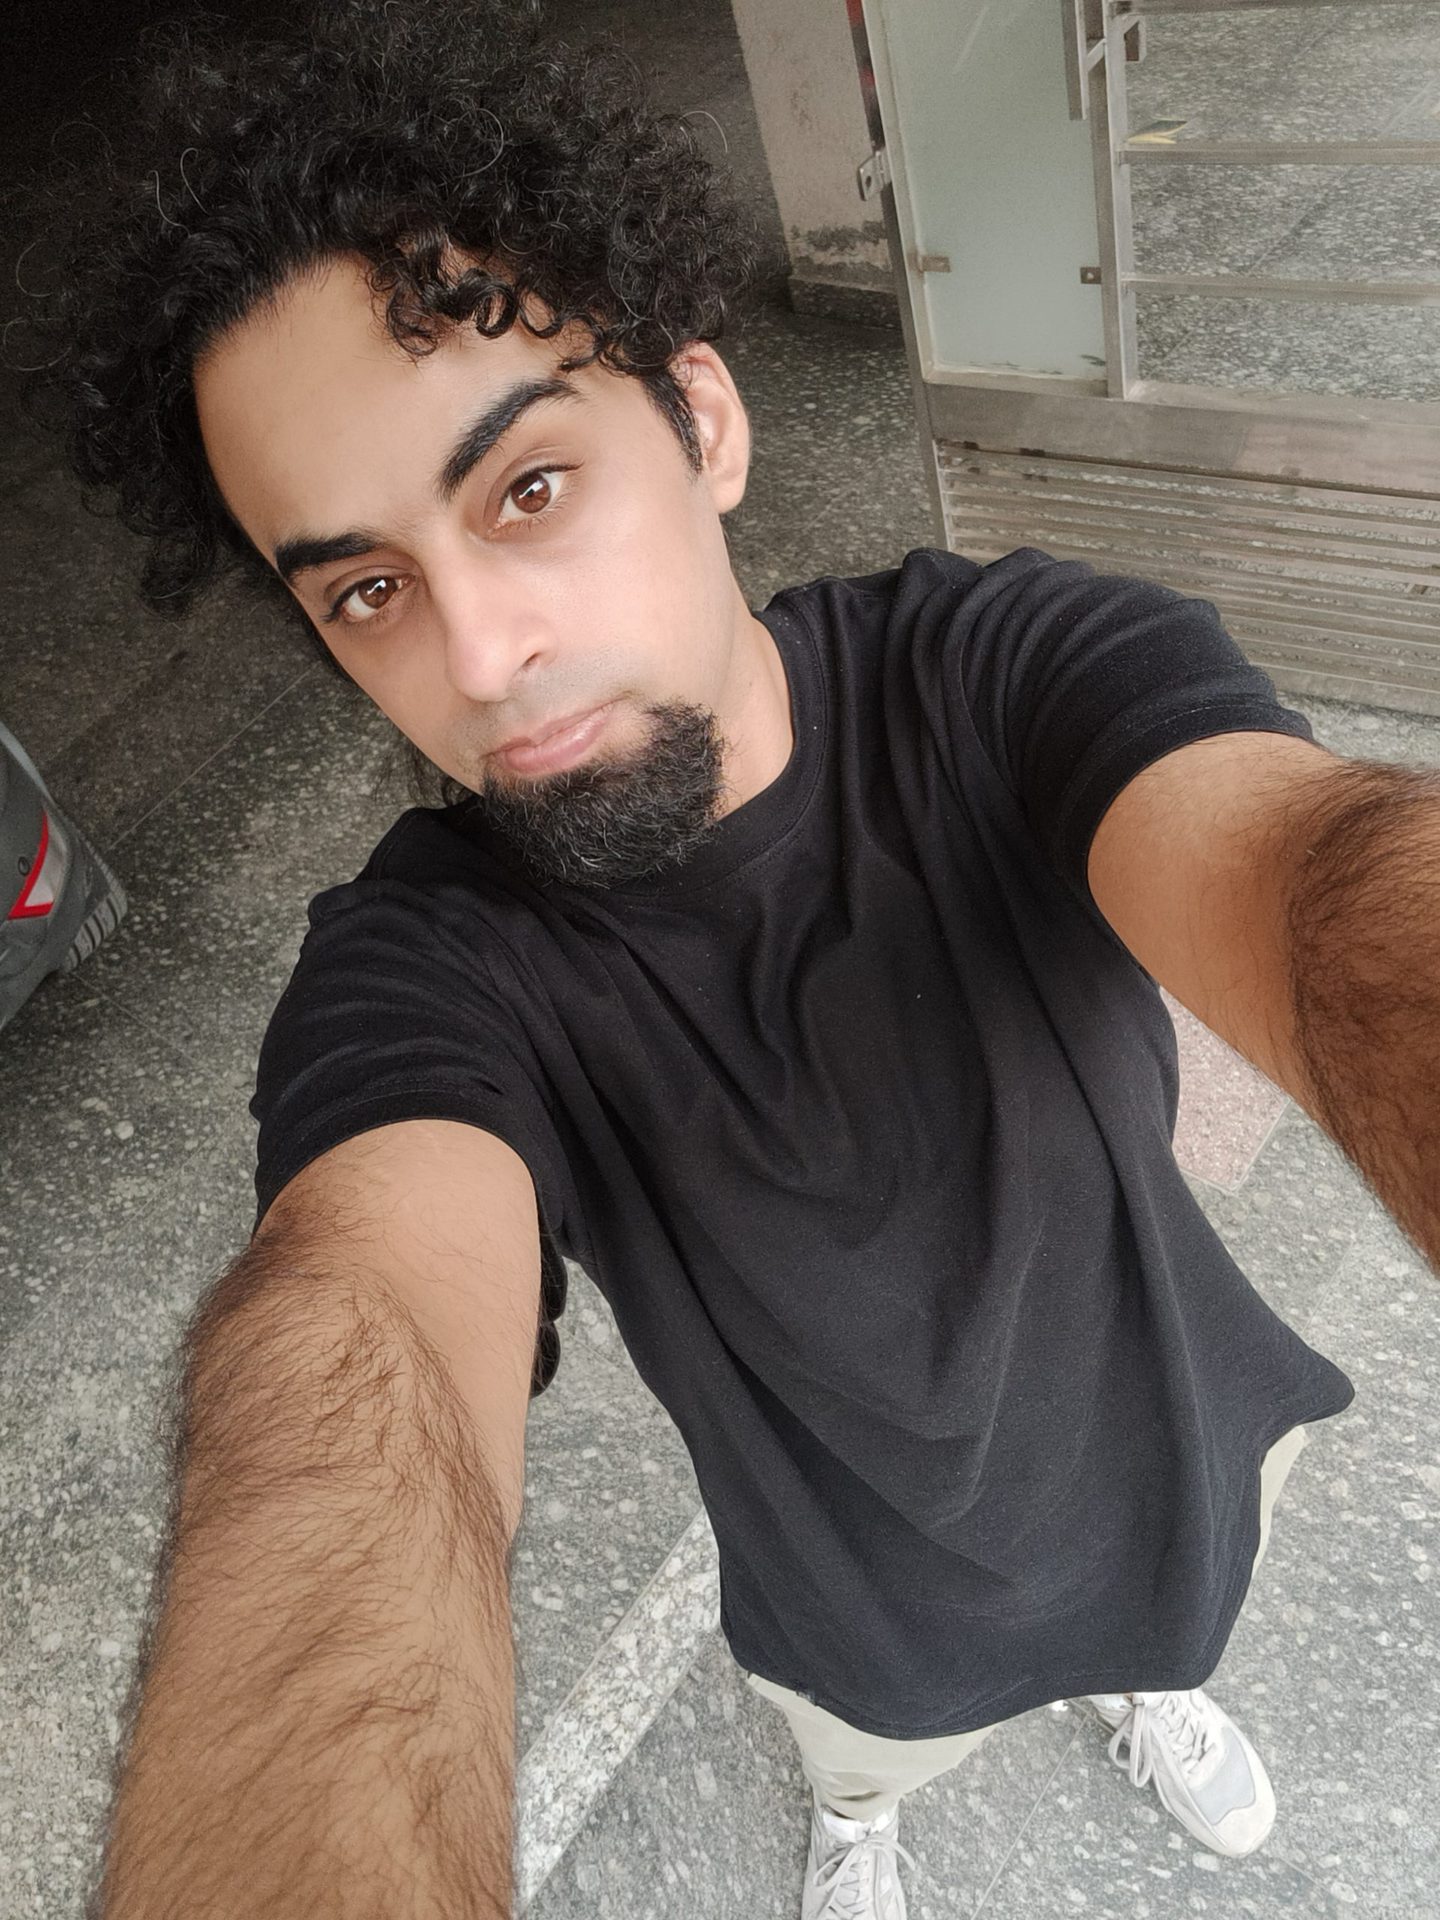 Realme GT selfie sample shot of a man with dark curly hair and a beard, wearing a black t-shirt.